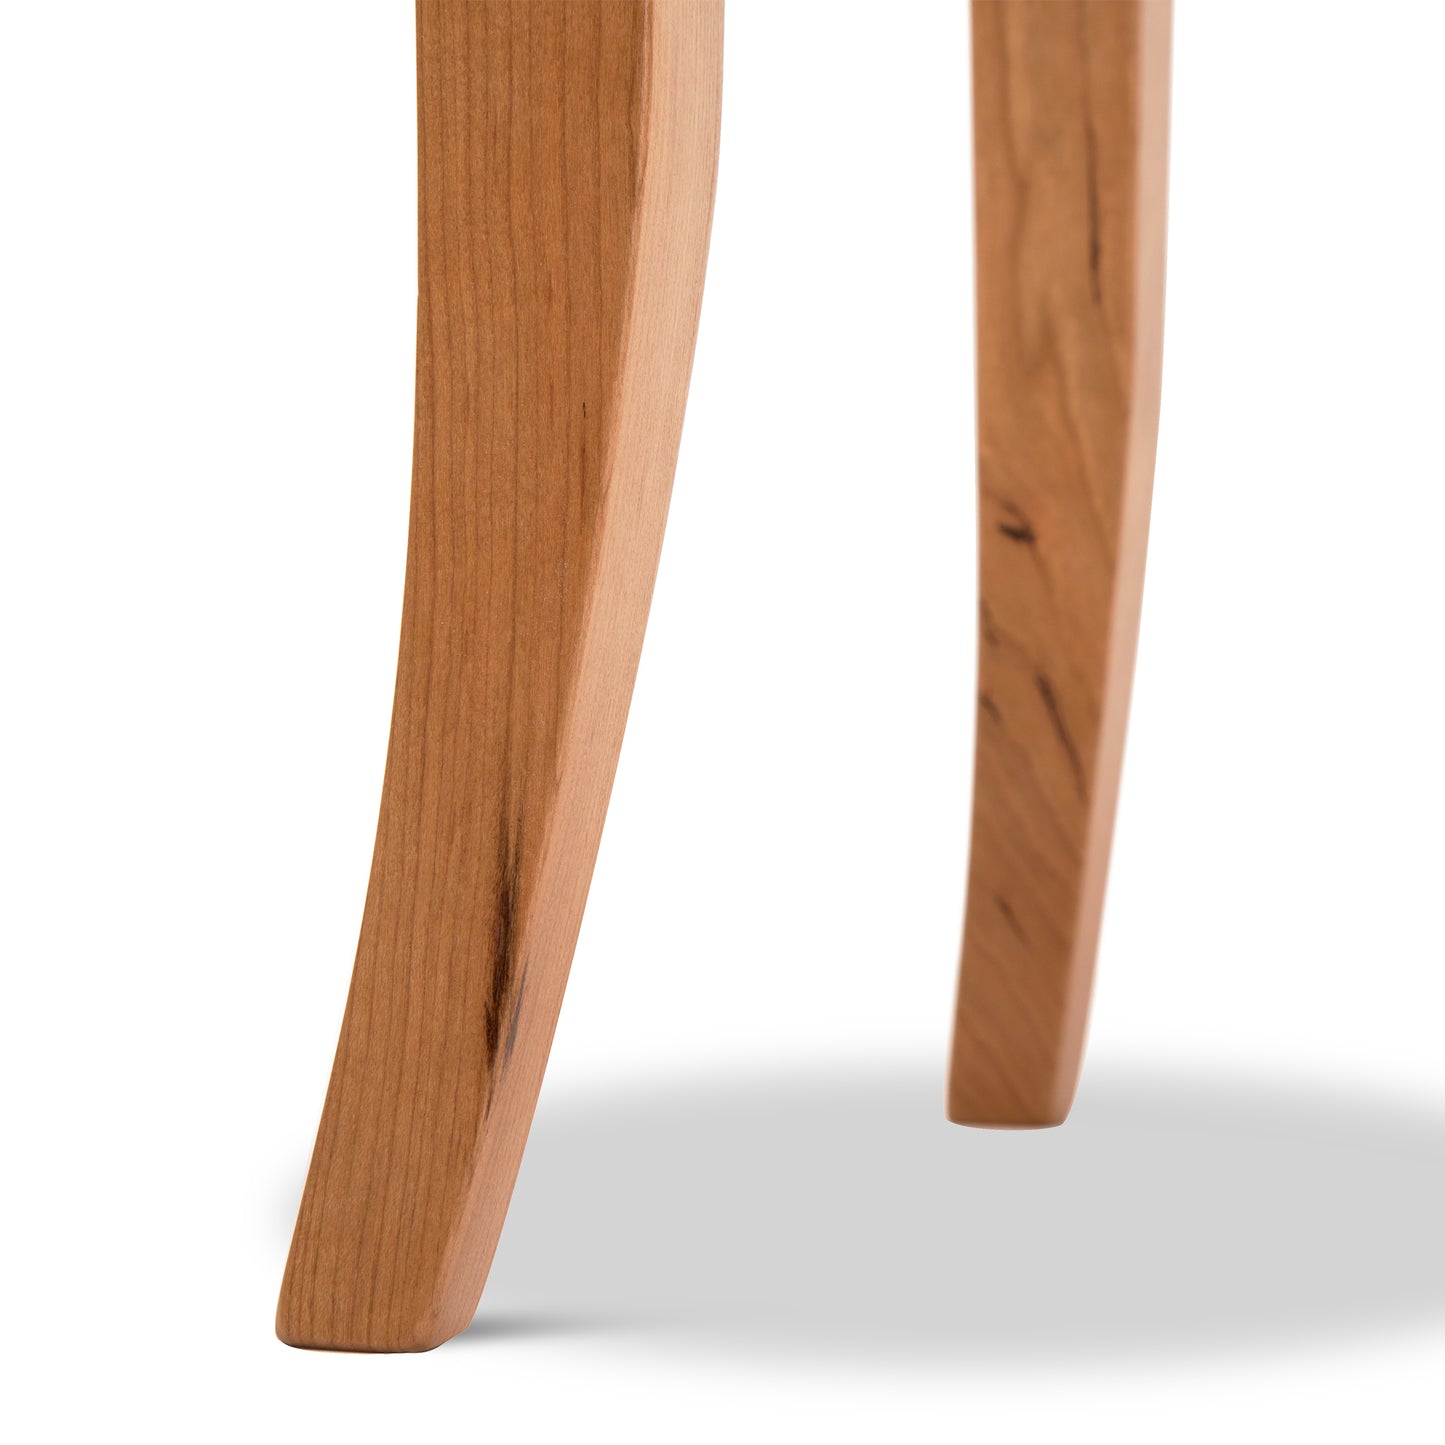 Close-up view of the wooden legs of a Lyndon Furniture Classic Shaker Round Flare Leg End Table, showing detailed wood grain and texture on a plain white background.